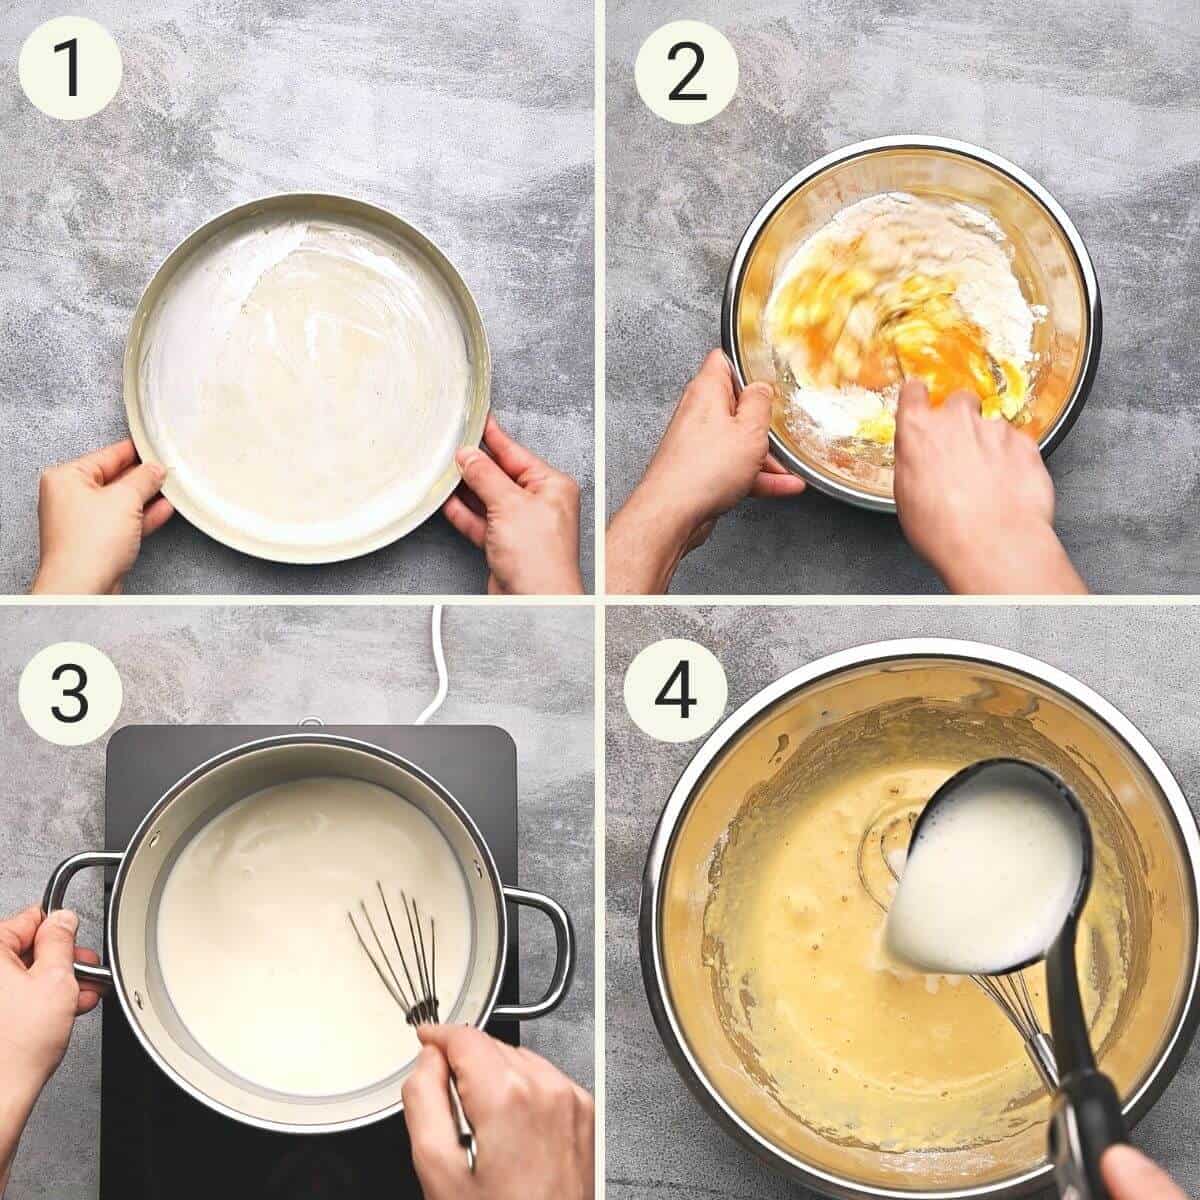 a collage of steps 1-4 for preparing galatopita.